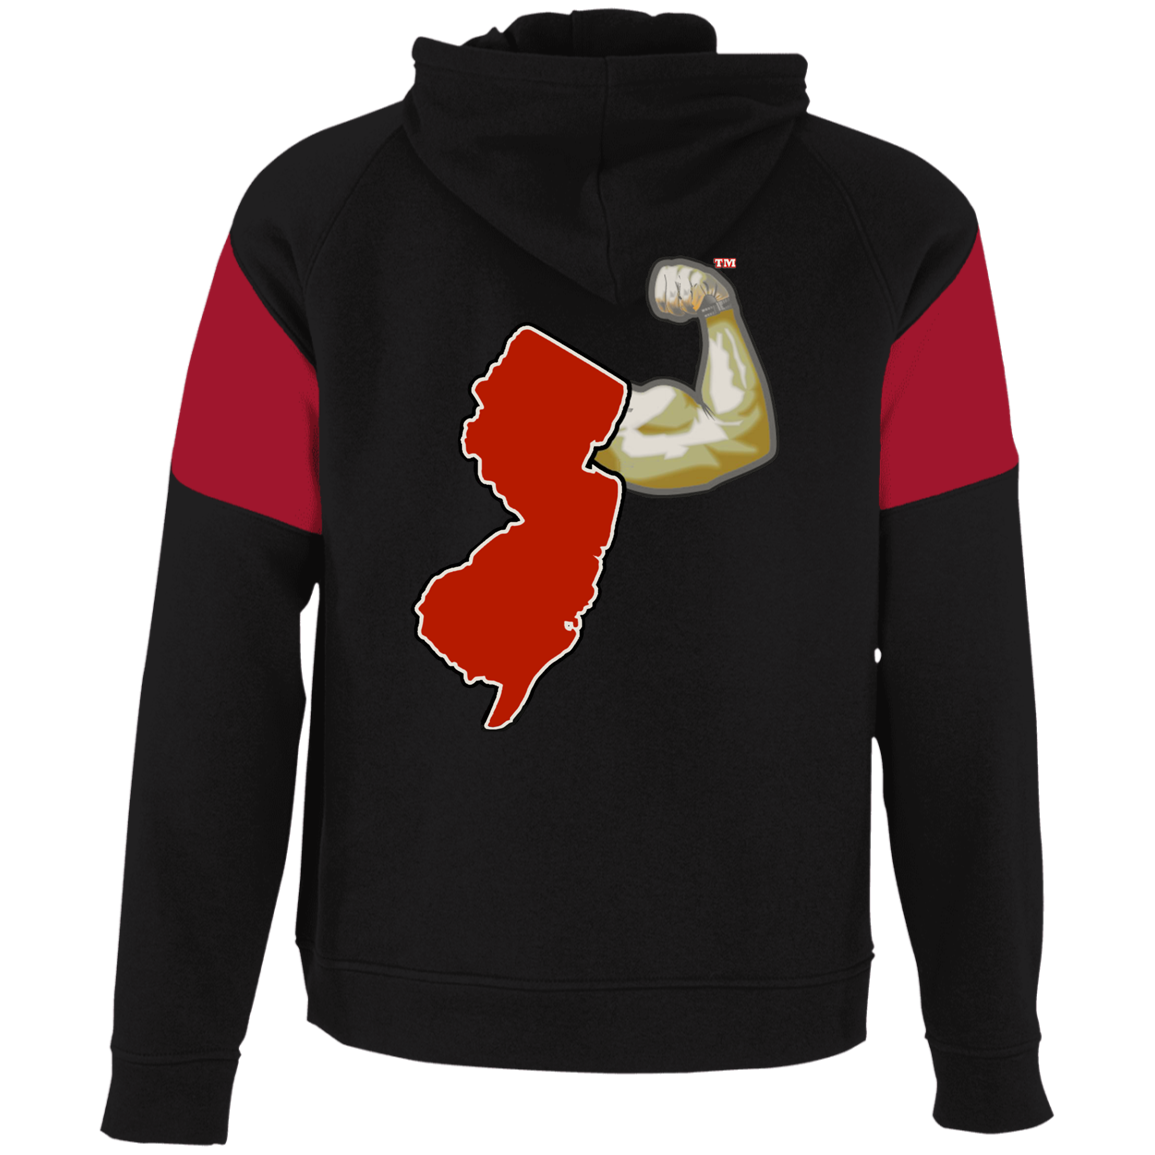 Flex youR Strong - Colorblock Hoodie - Fan Club Series